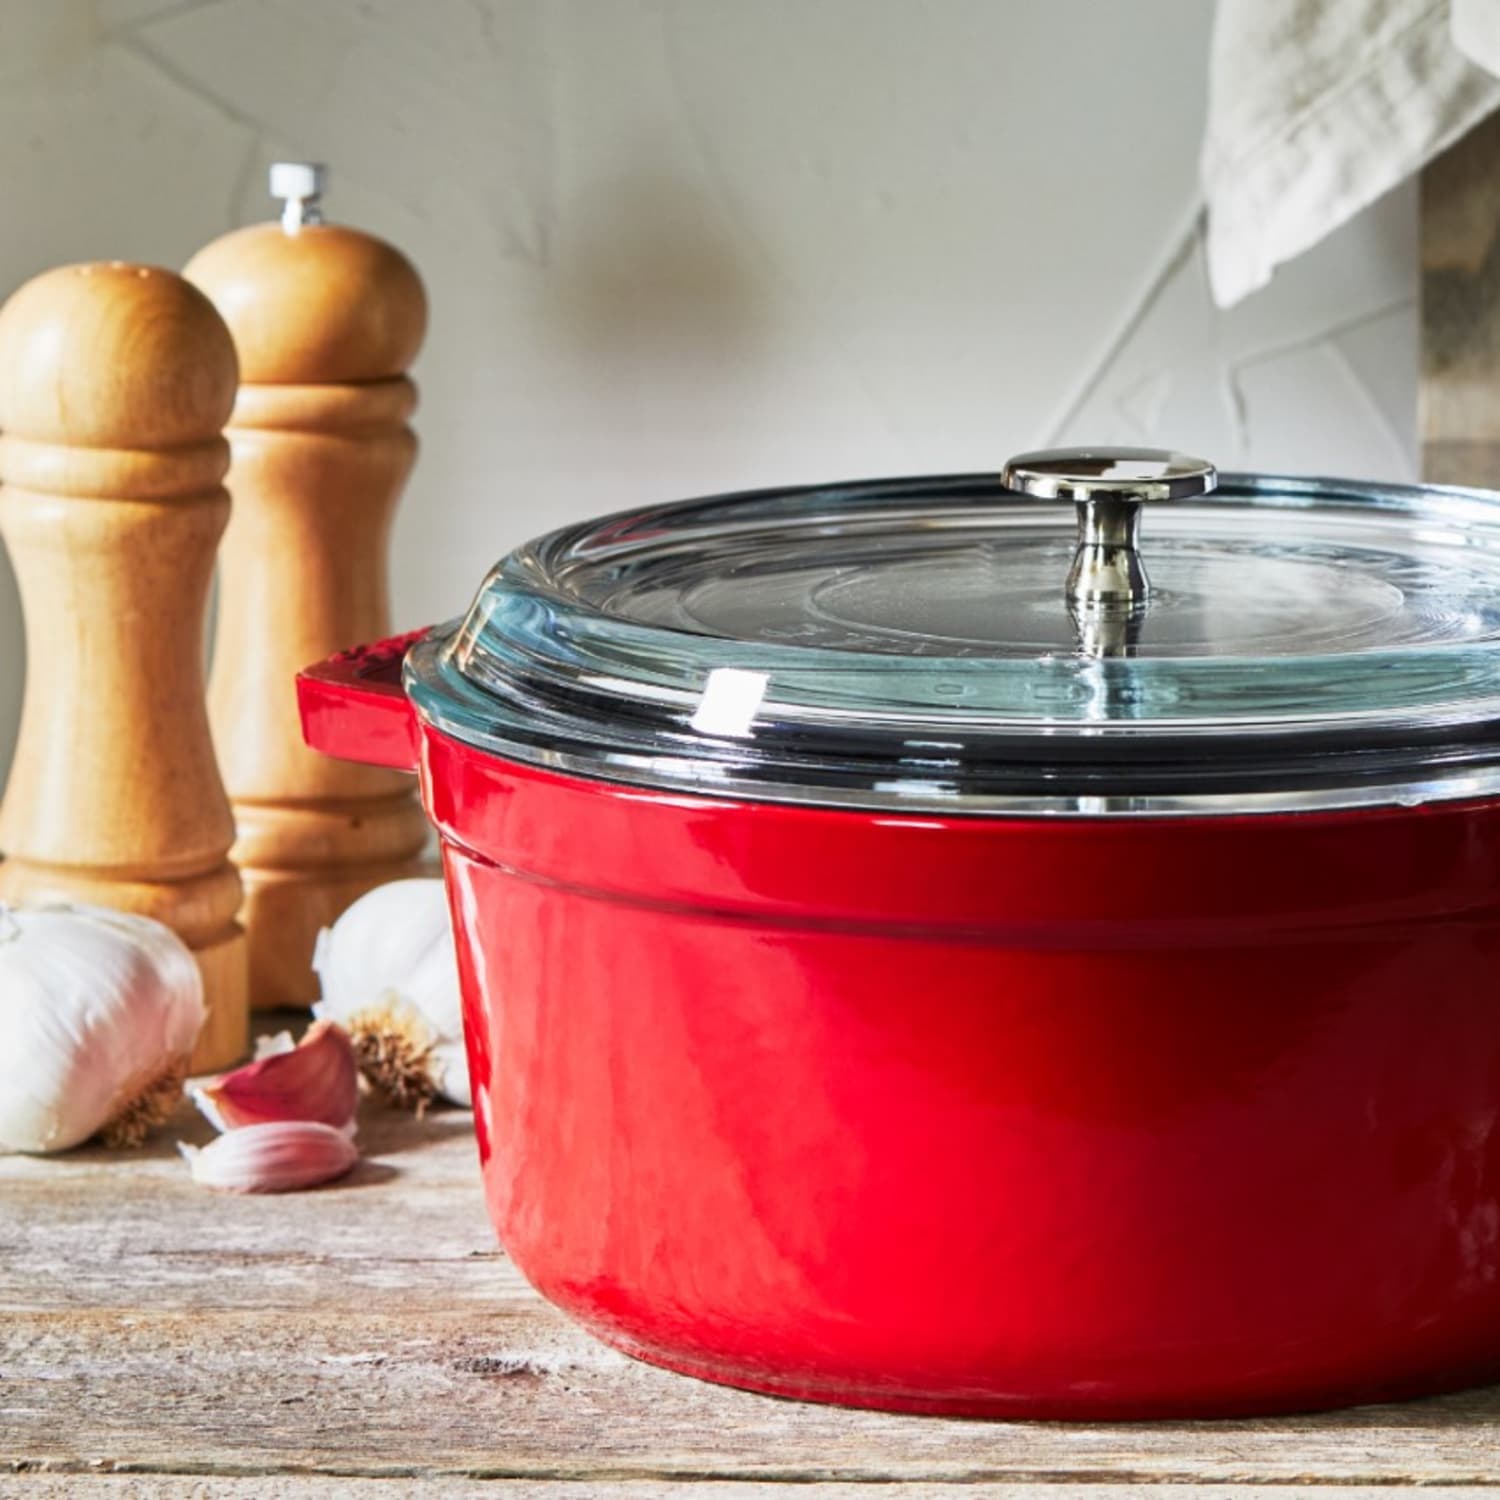 Staub's Popular Cocotte Dutch Oven Is on Sale for $100